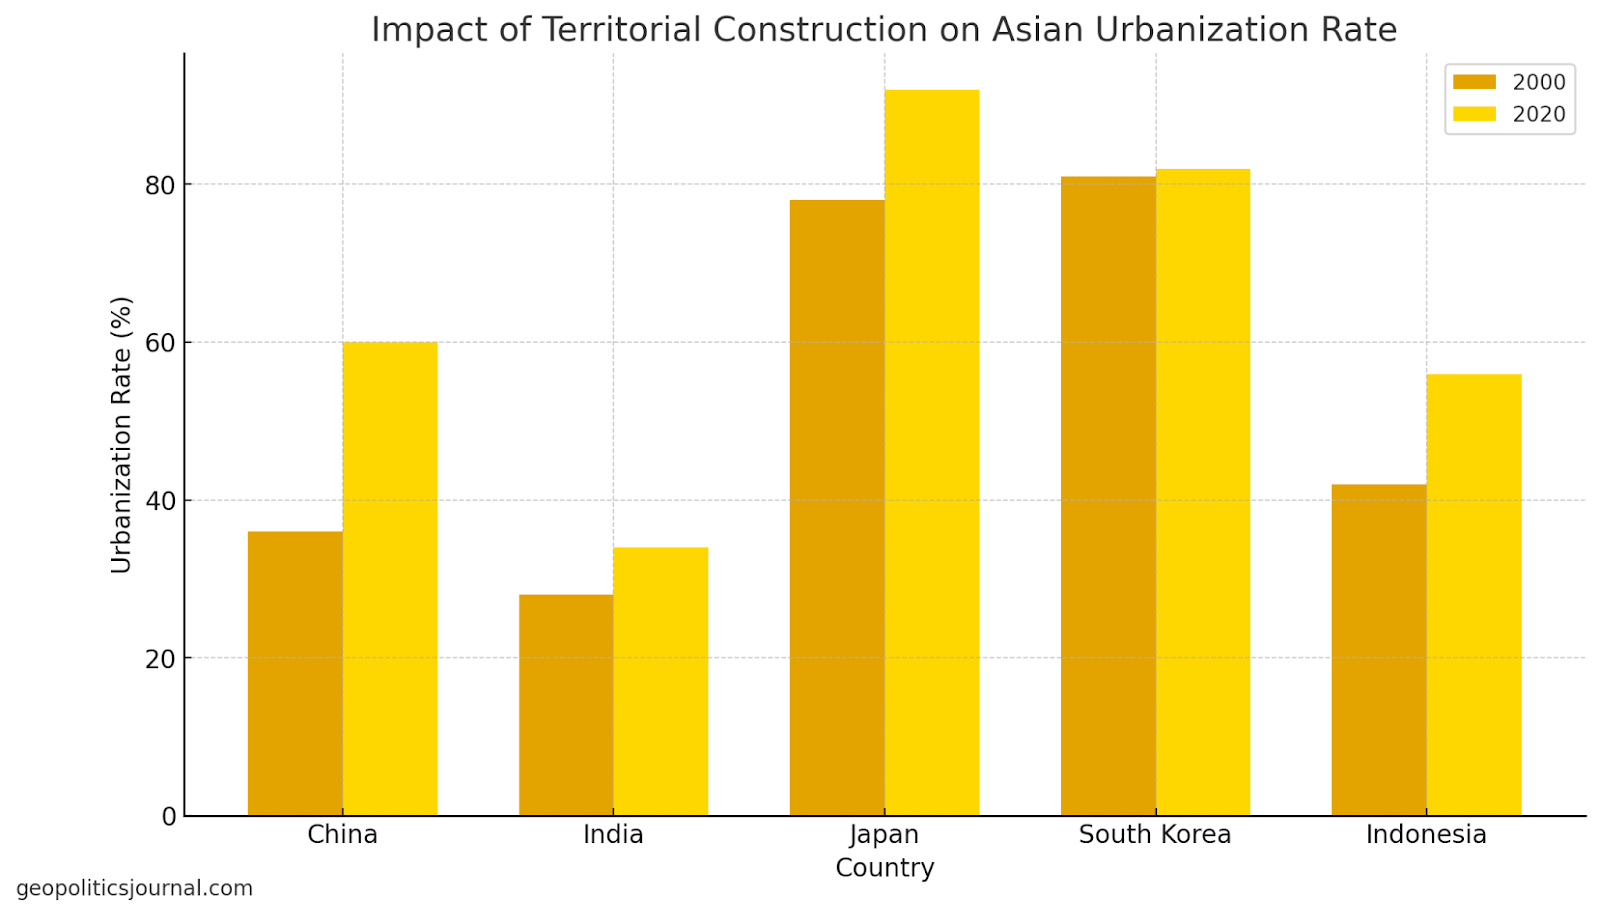 The visualization above depicts the "Impact of Territorial Construction on Asian Urbanization Rate," highlighting the significant increase in urbanization rates from 2000 to 2020 across five major Asian countries: China, India, Japan, South Korea, and Indonesia. This increase reflects the substantial influence of territorial construction projects, including urban development and infrastructure initiatives, on urbanization trends in Asia.